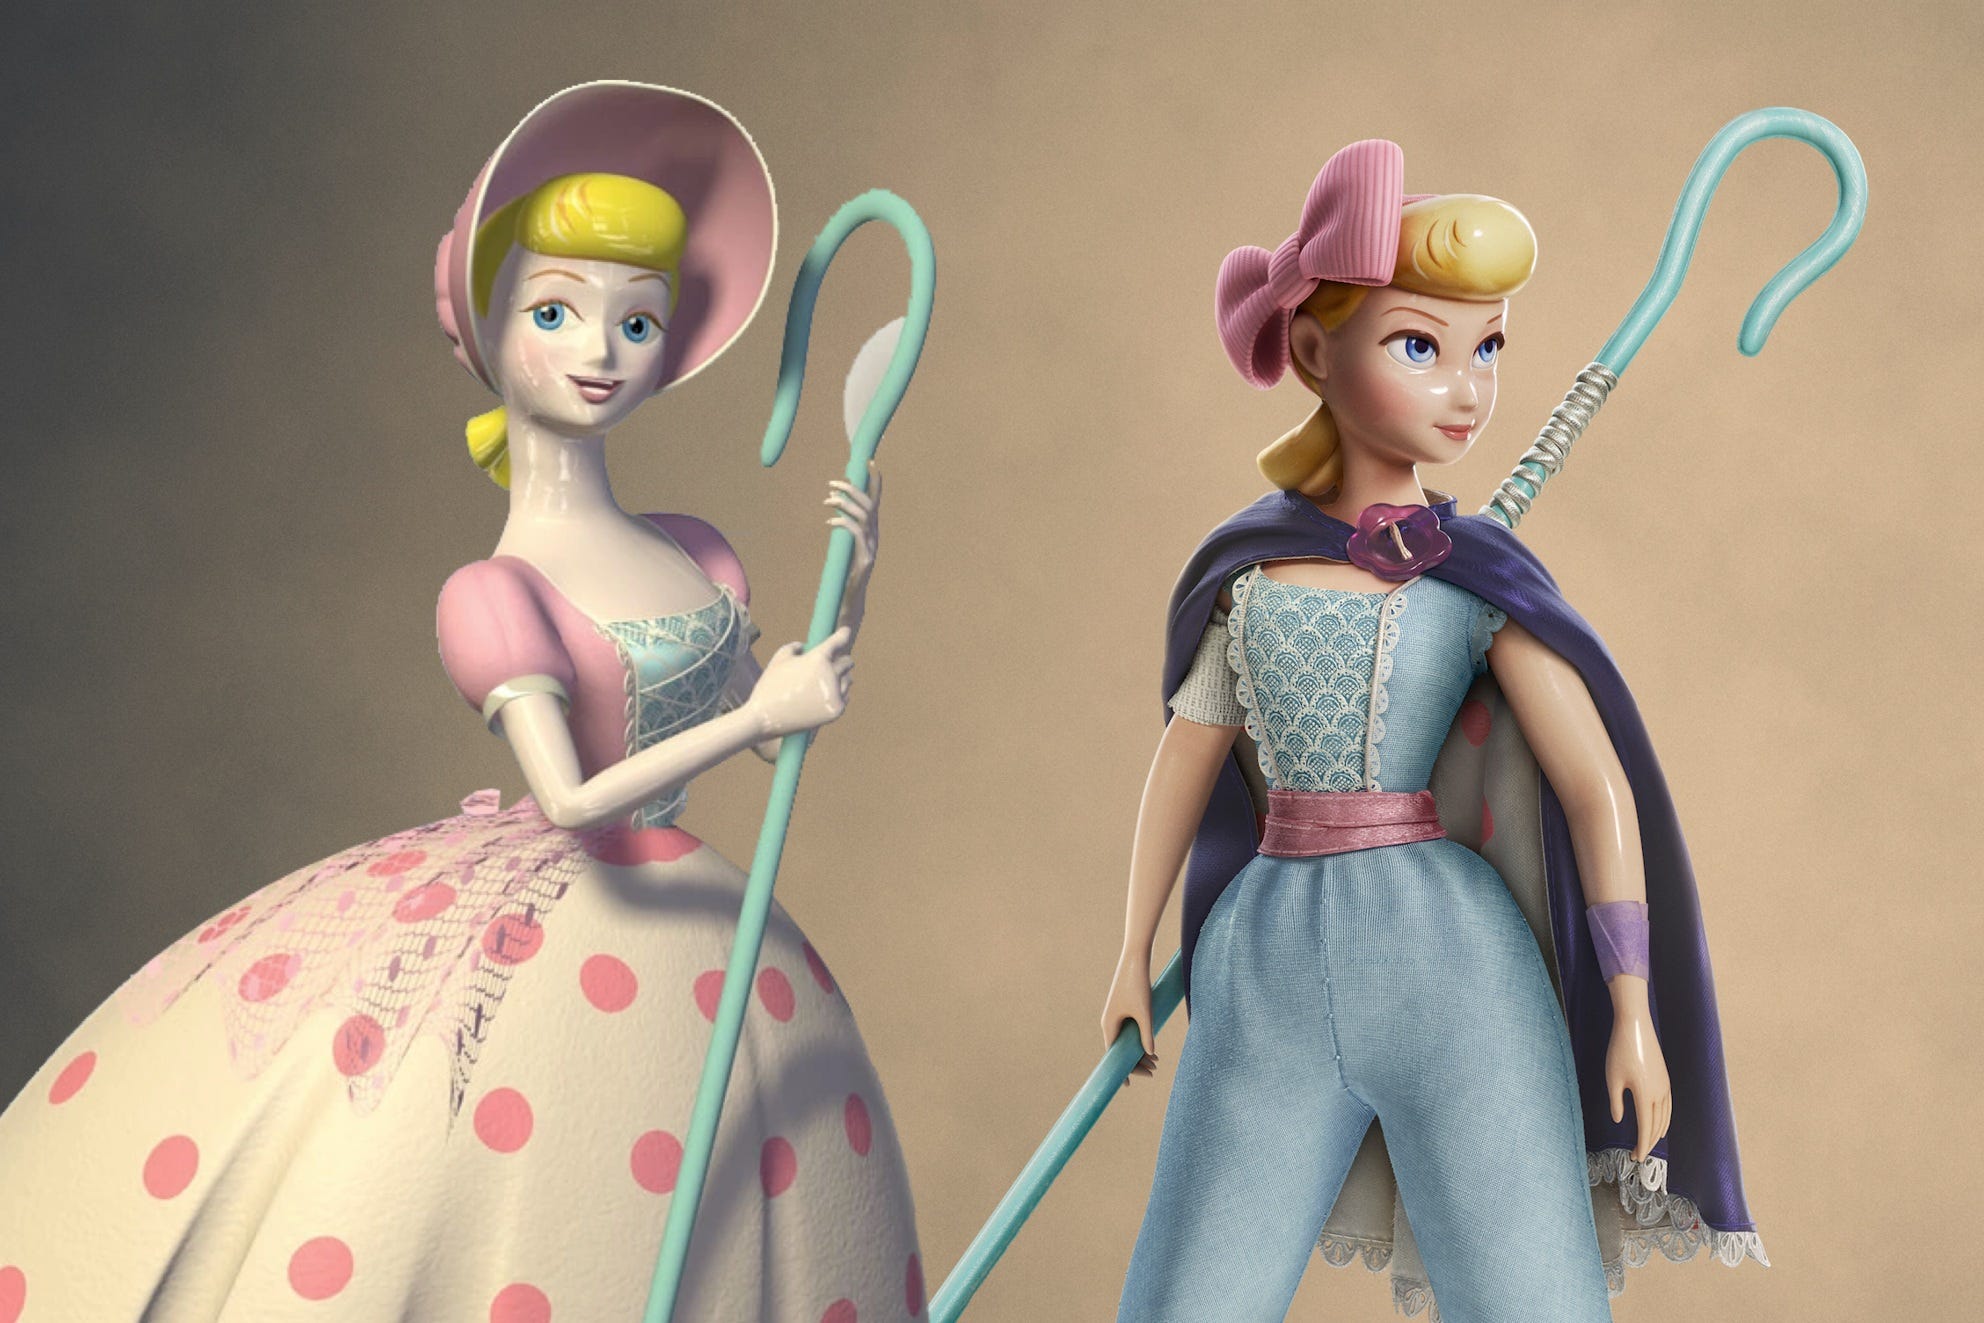 Sexism and stereotypes in 'Toy Story 3?' 